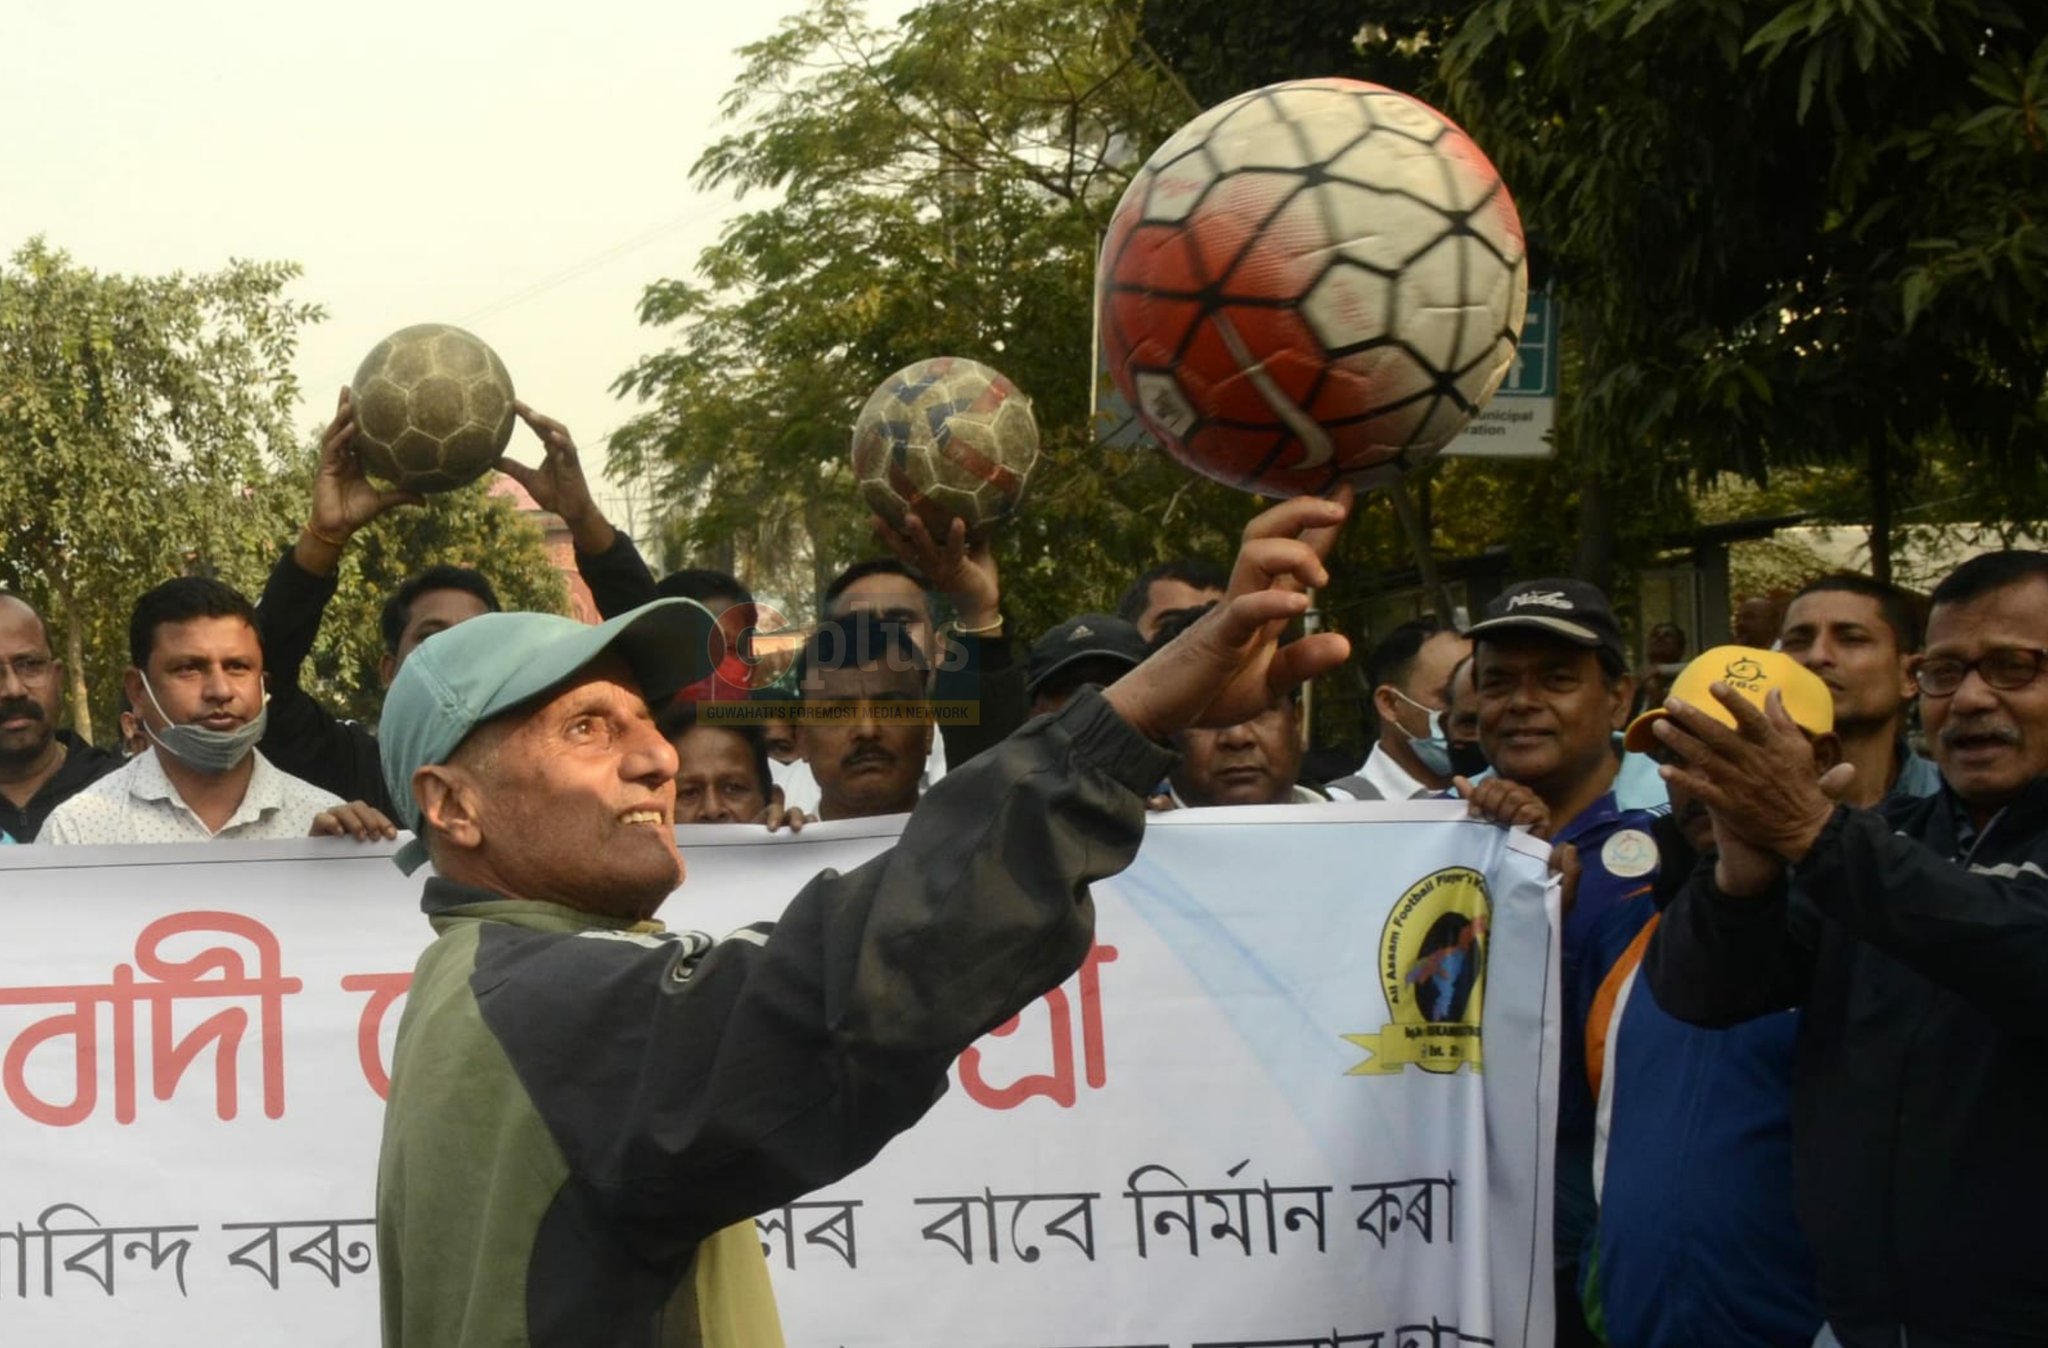 Over 500 footballers took to the street to protest the lack of football grounds in Assam, after losing Guwahati's Nehru Stadium to the Ranji Trophy